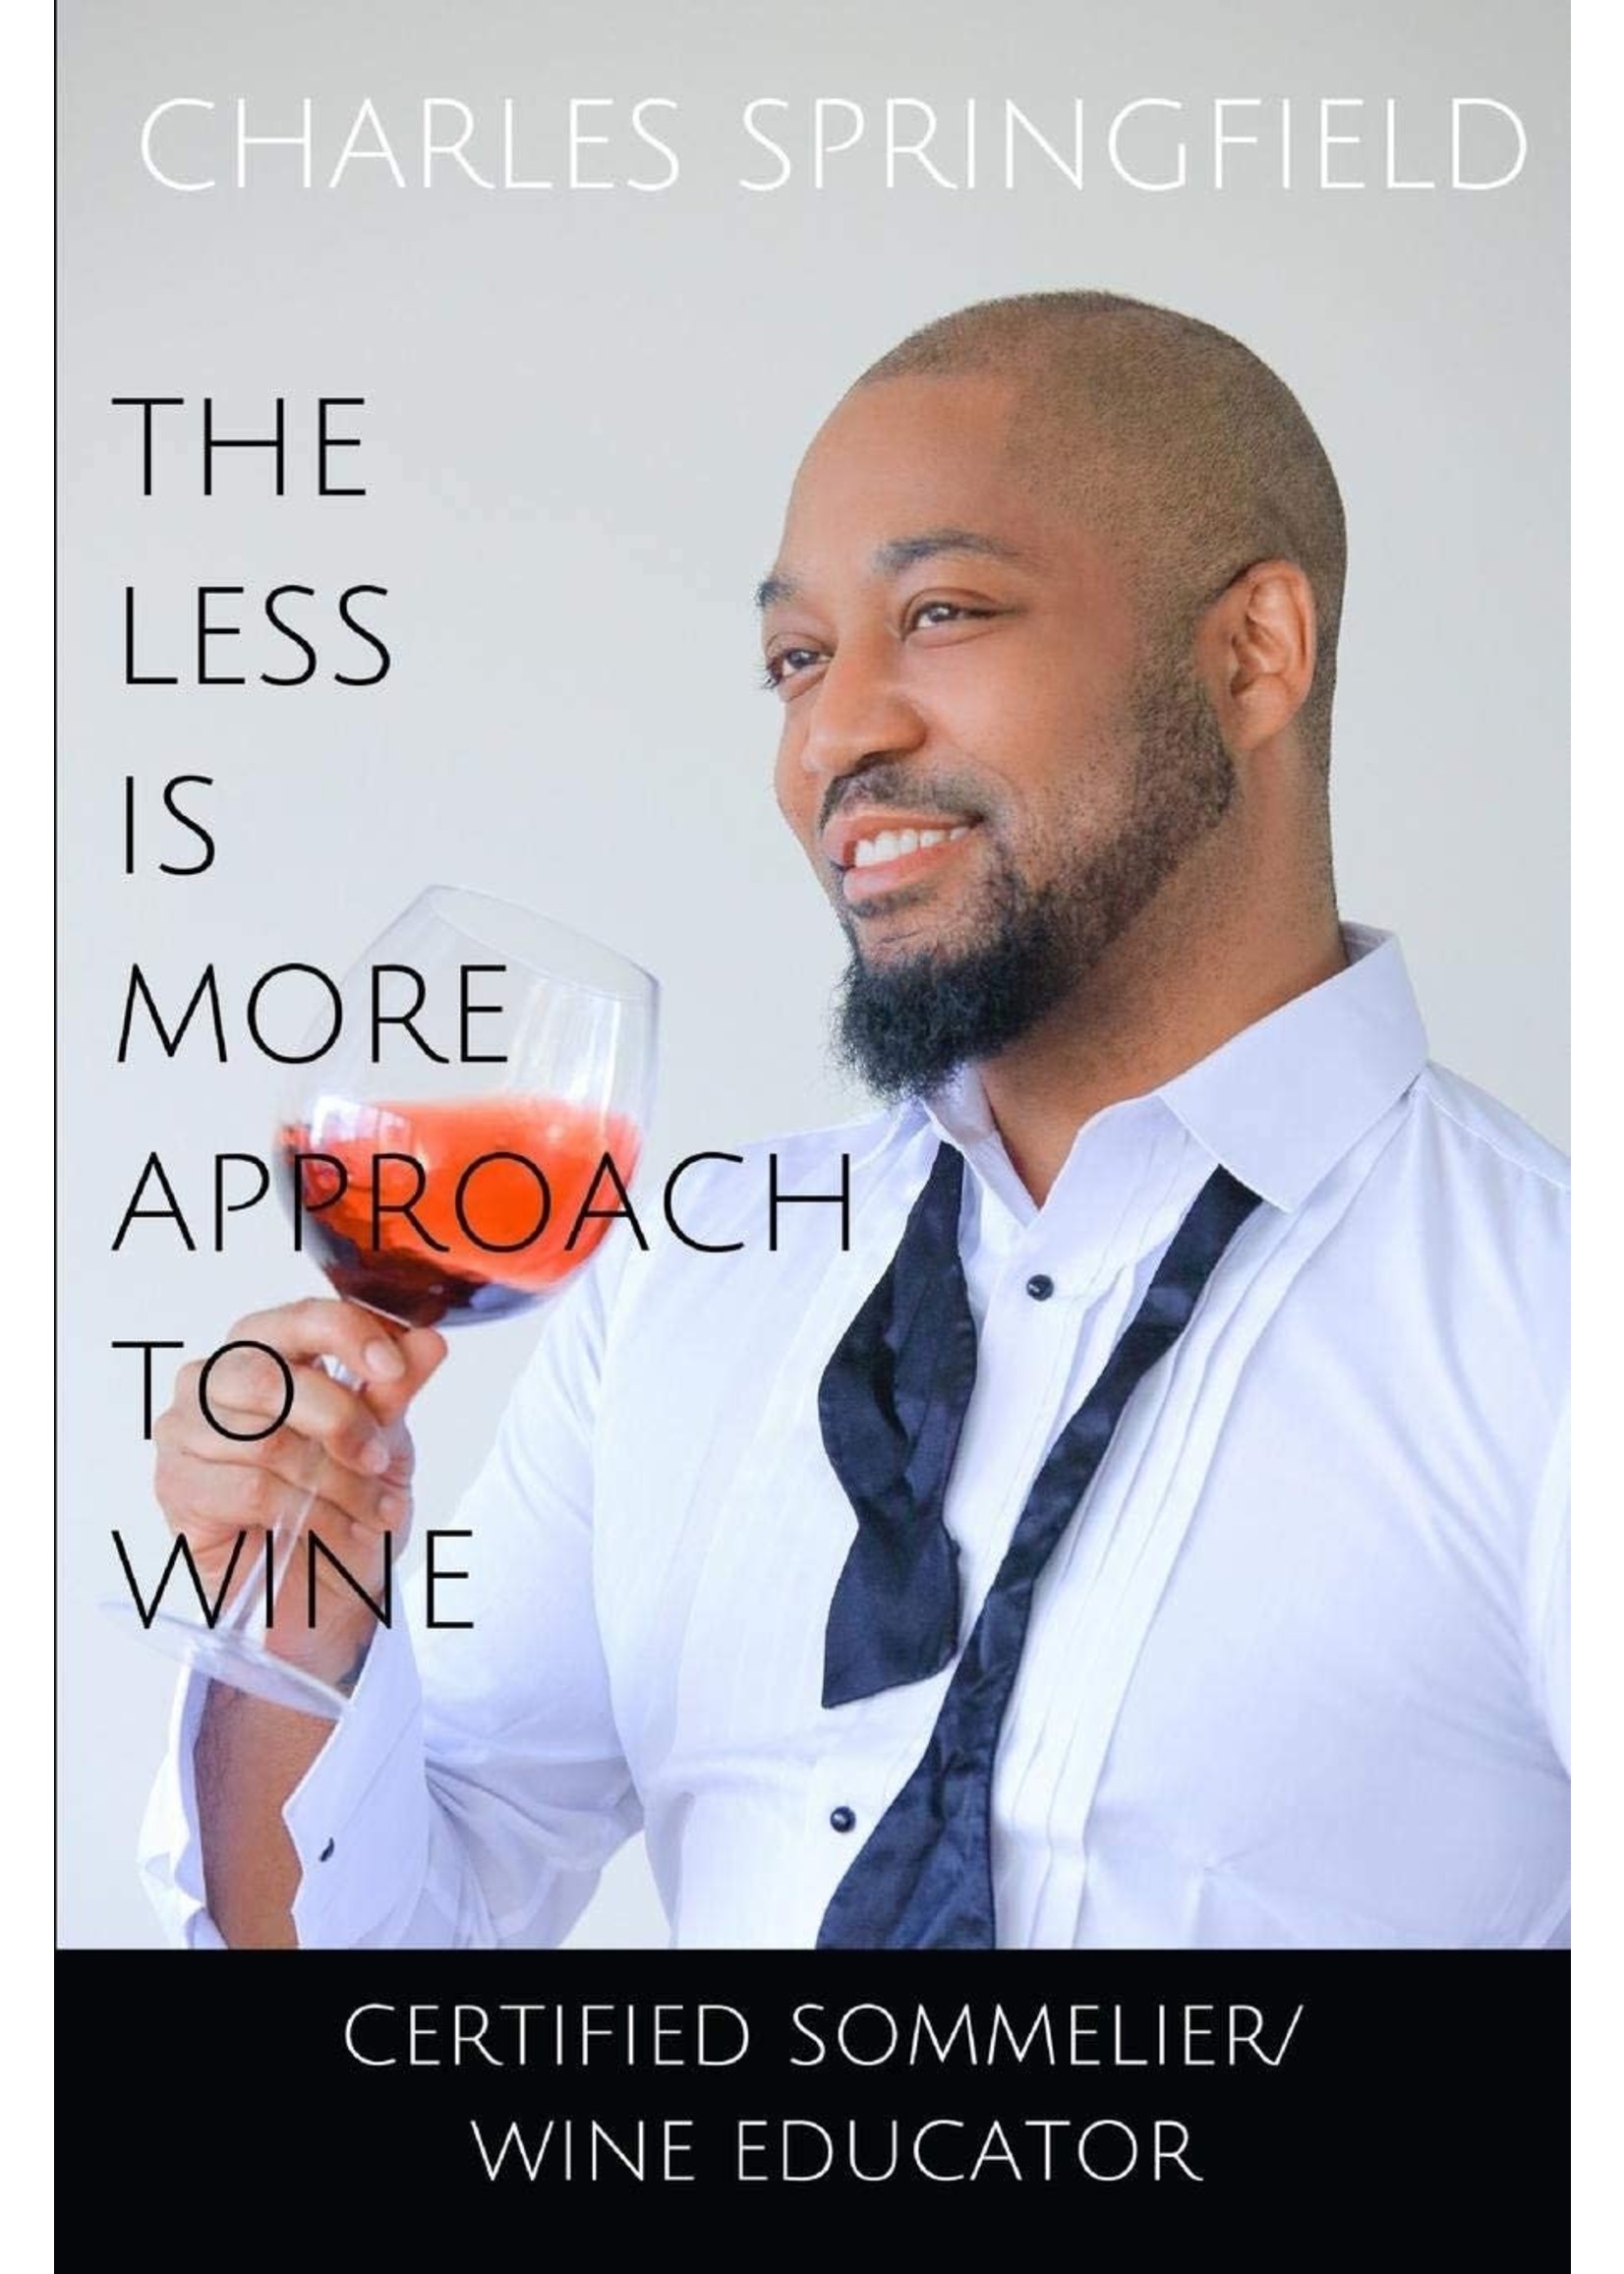 Charles Springfield The Less Is More Approach To Wine